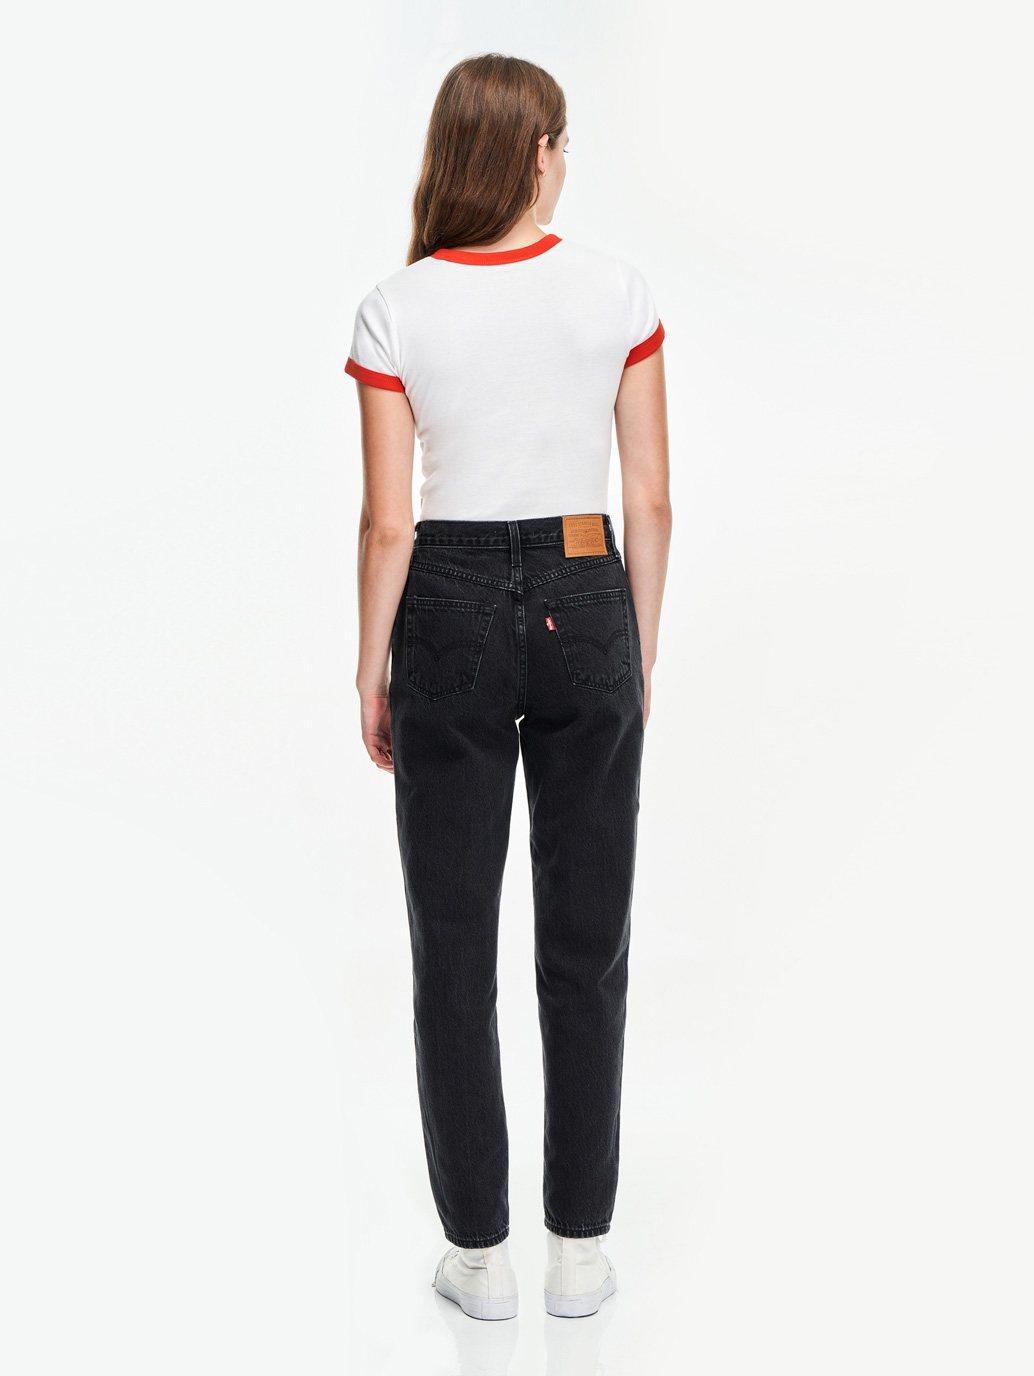 levis singapore womens 80s mom jeans A35060006 02 Back